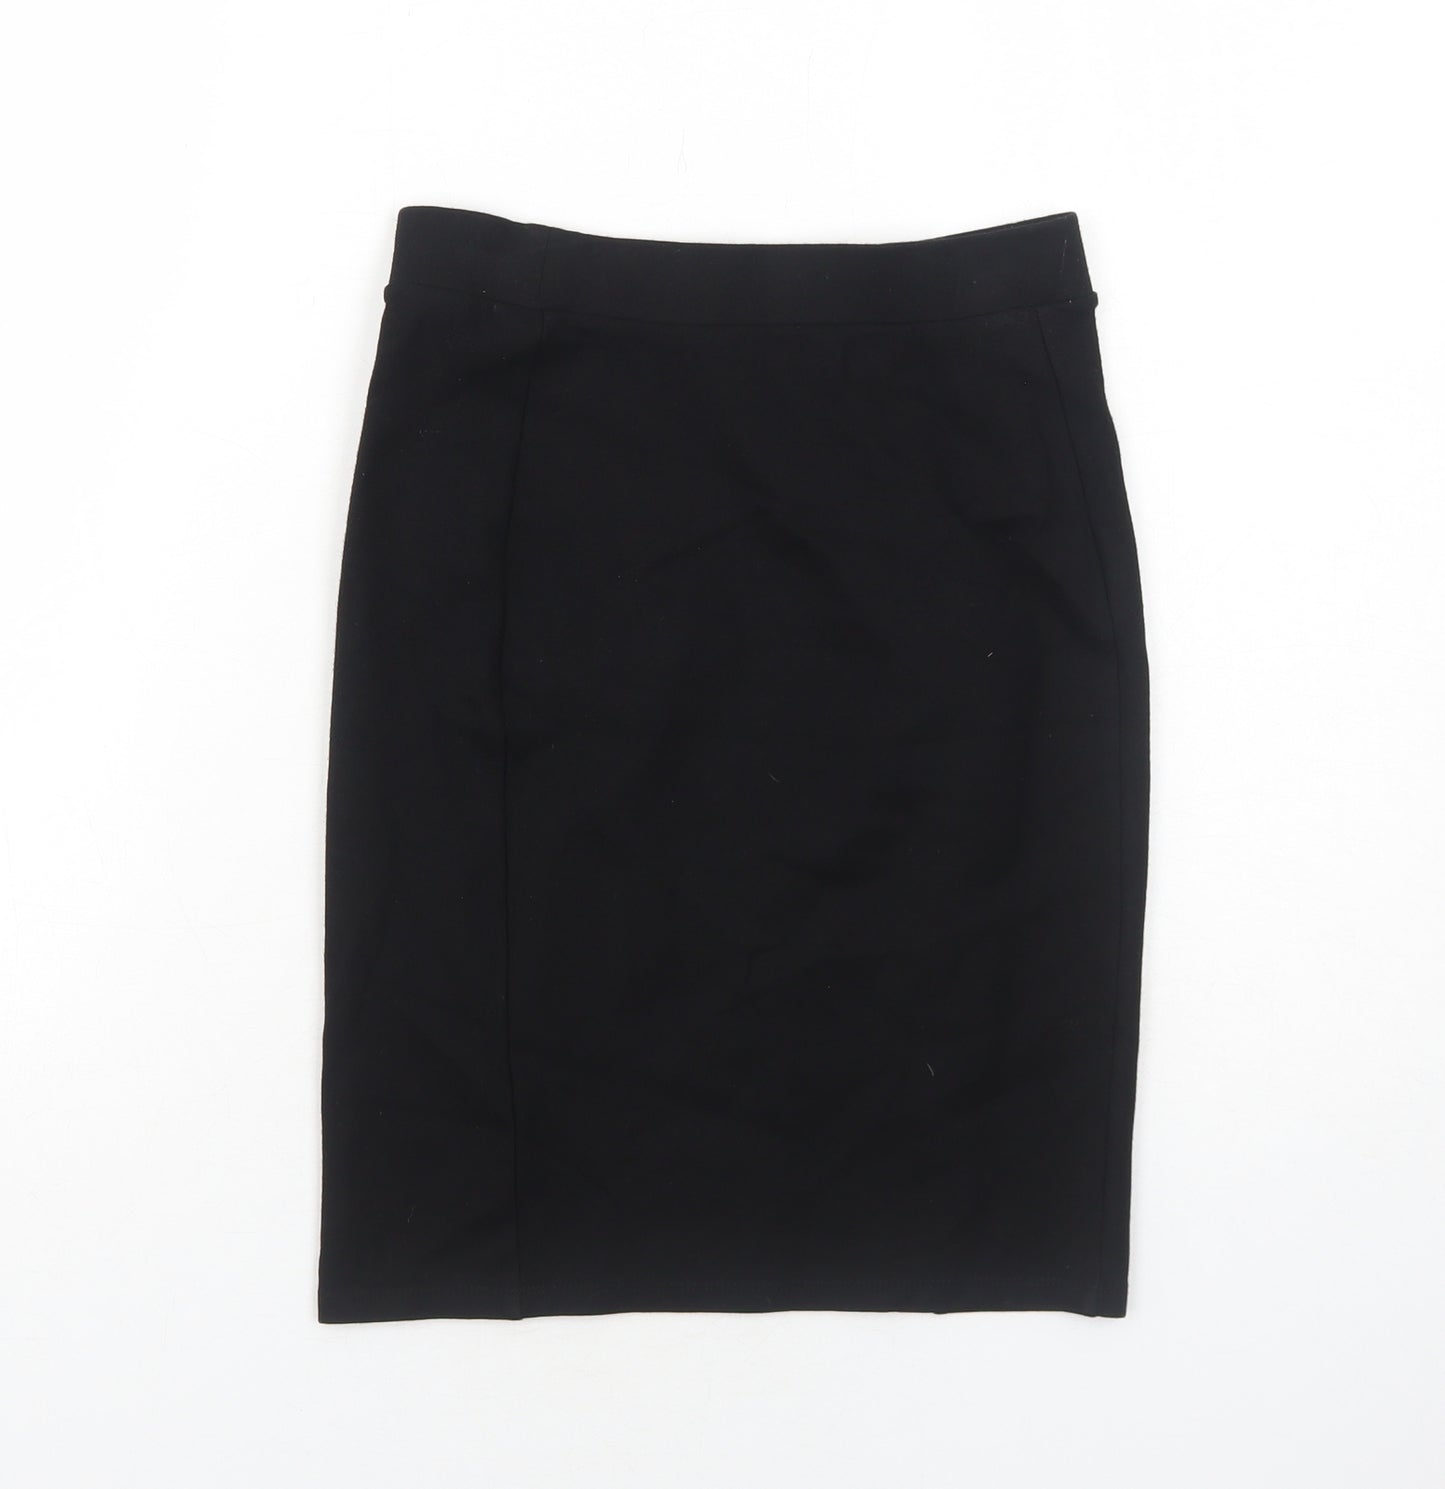 Marks and Spencer Girls Black Viscose Straight & Pencil Skirt Size 11-12 Years Regular Pull On